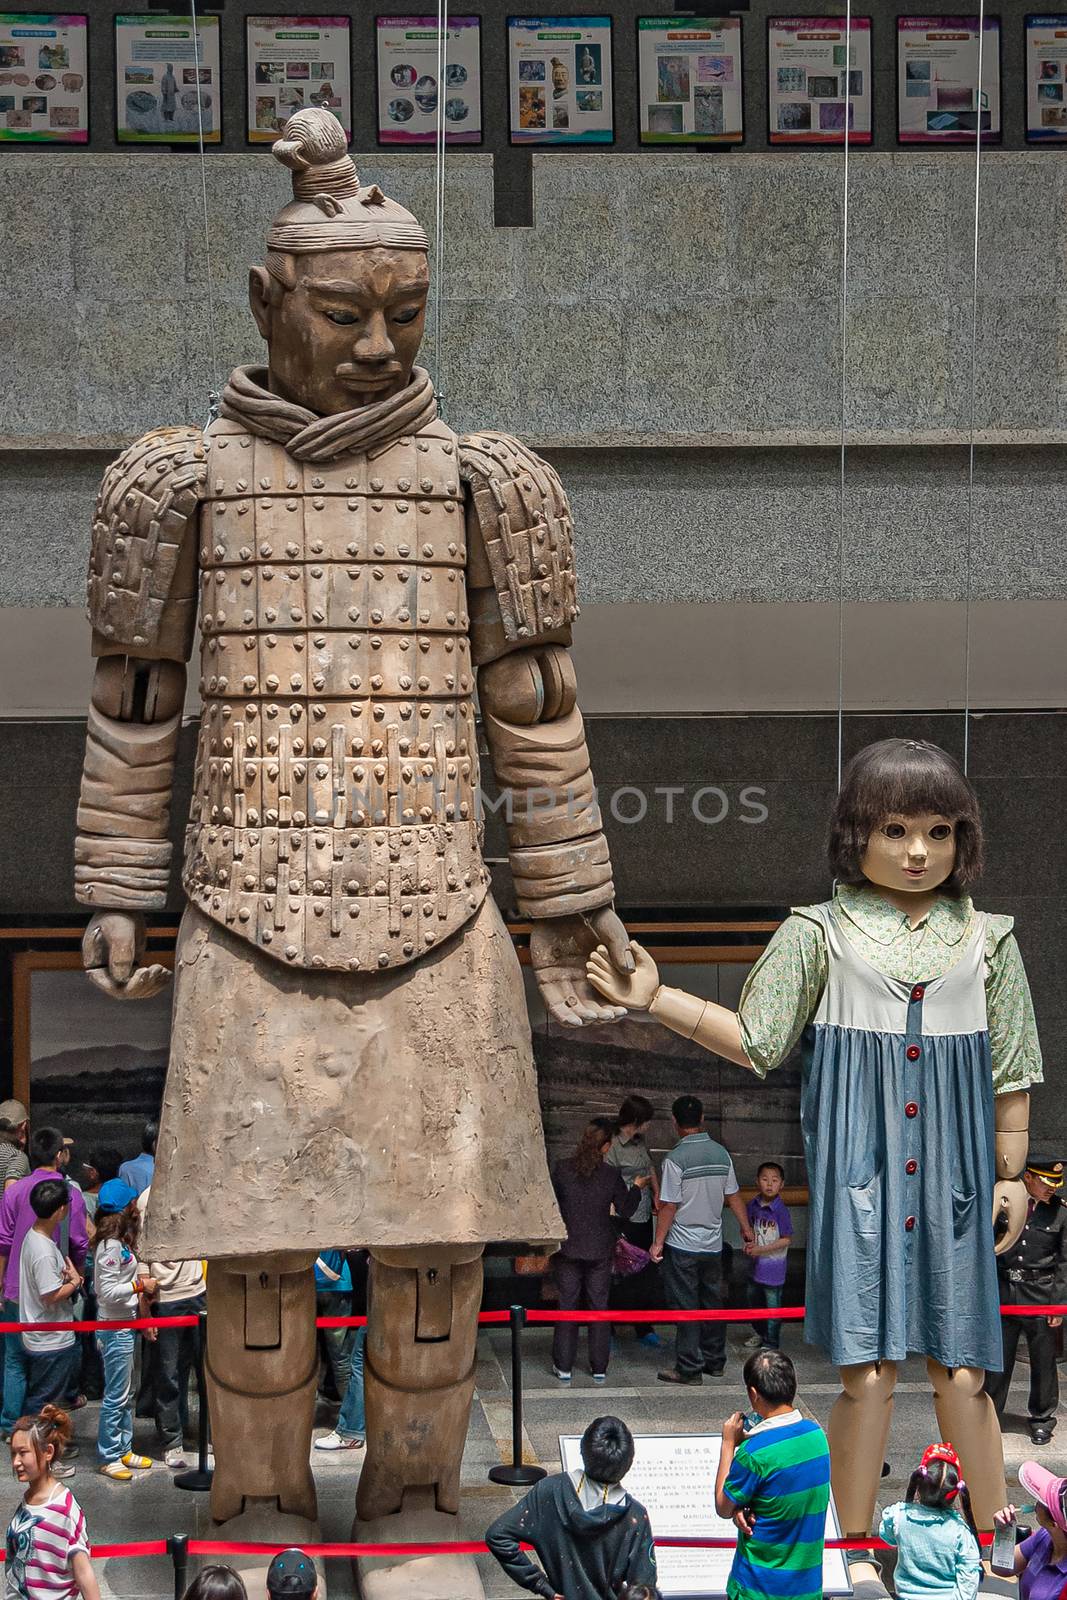 Xian, China - May 1, 2010: Terracotta Army museuml.  Giant light brown sculpture of officer in style holding hand of girl doll about half his size. People around.